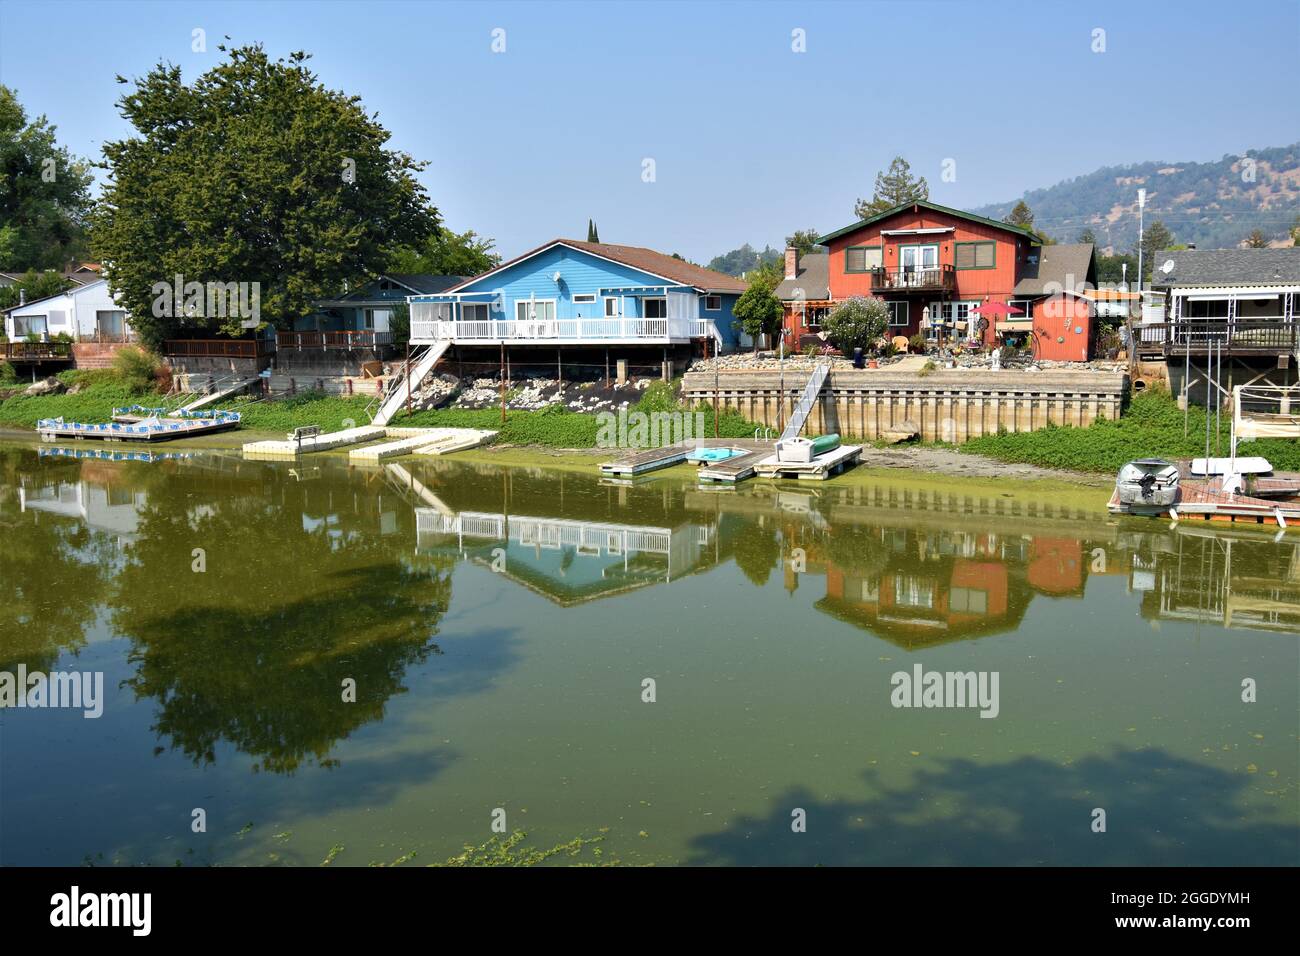 Drought effects in northern California where canal and channel are low or no water and boats are useless & stranded at the docks behind owners  homes Stock Photo